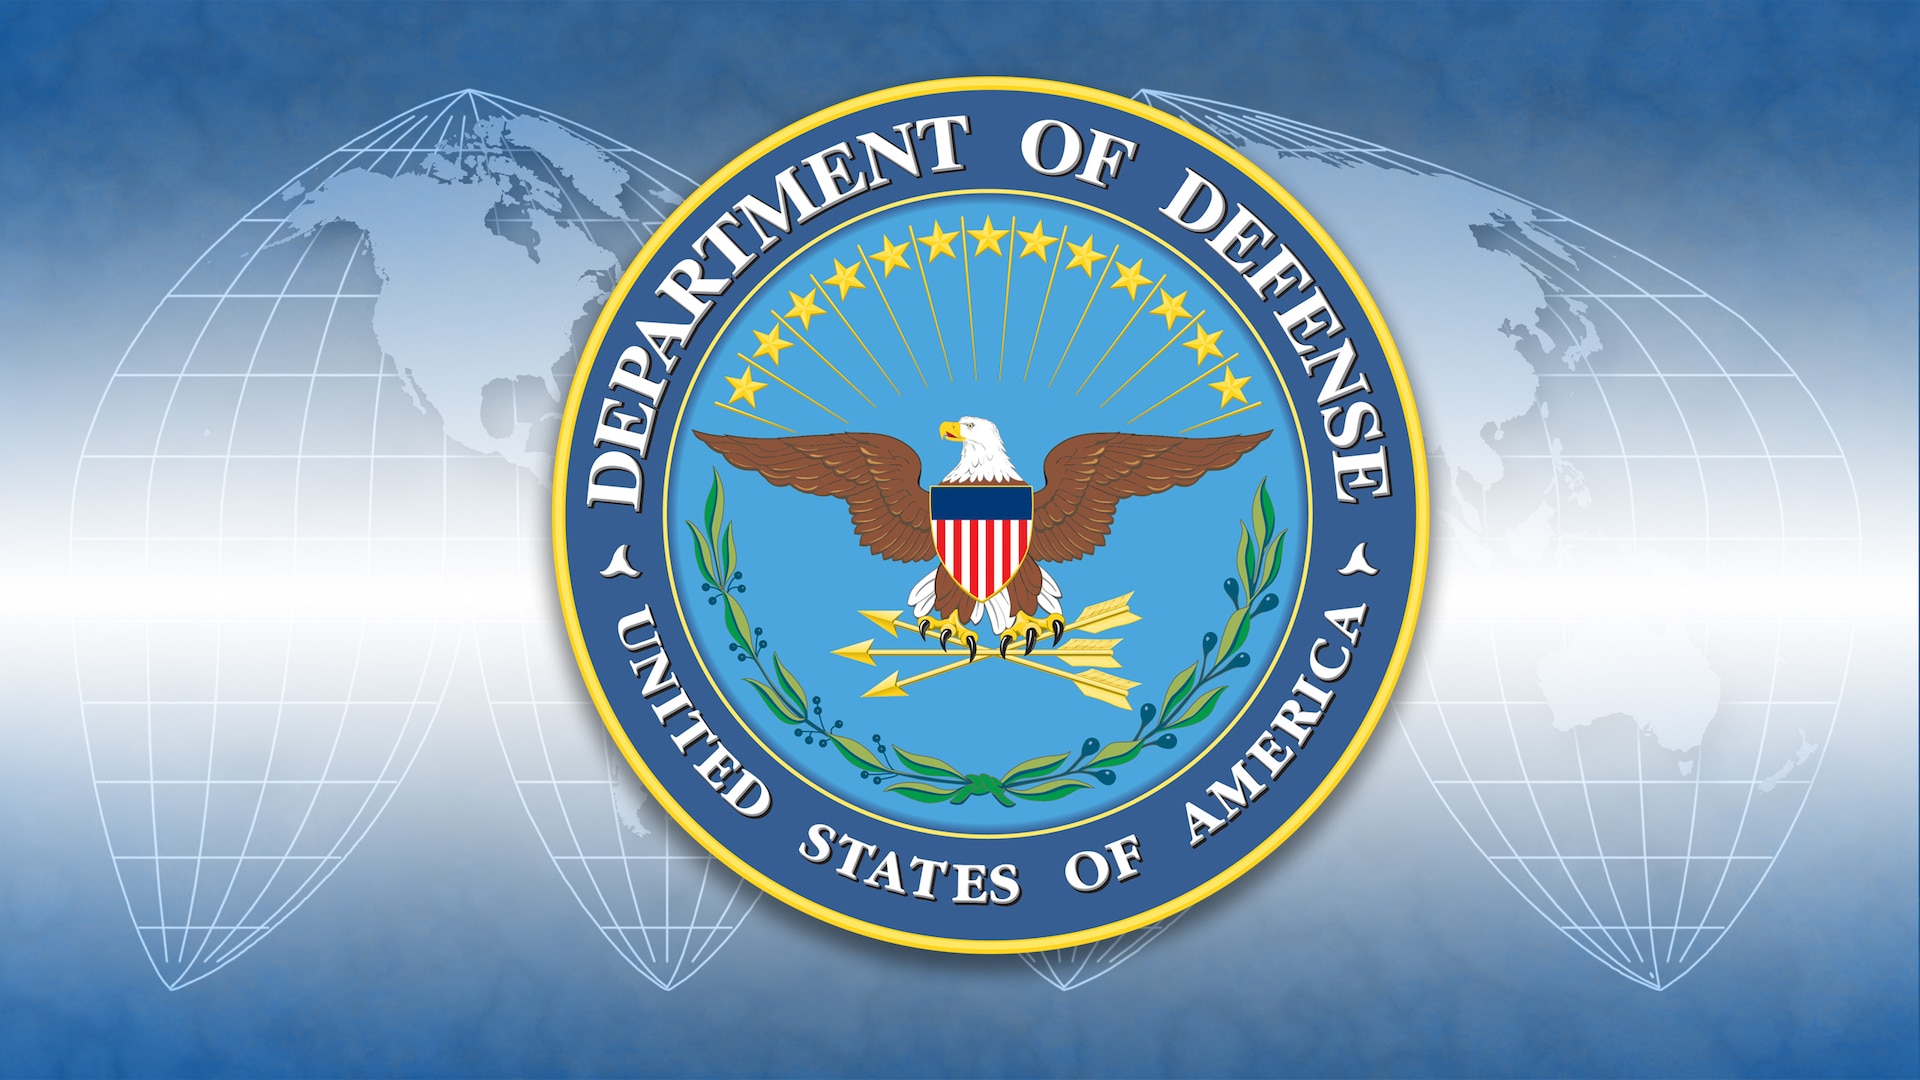 The Department of Defense emblem on a background with a segmented world map.